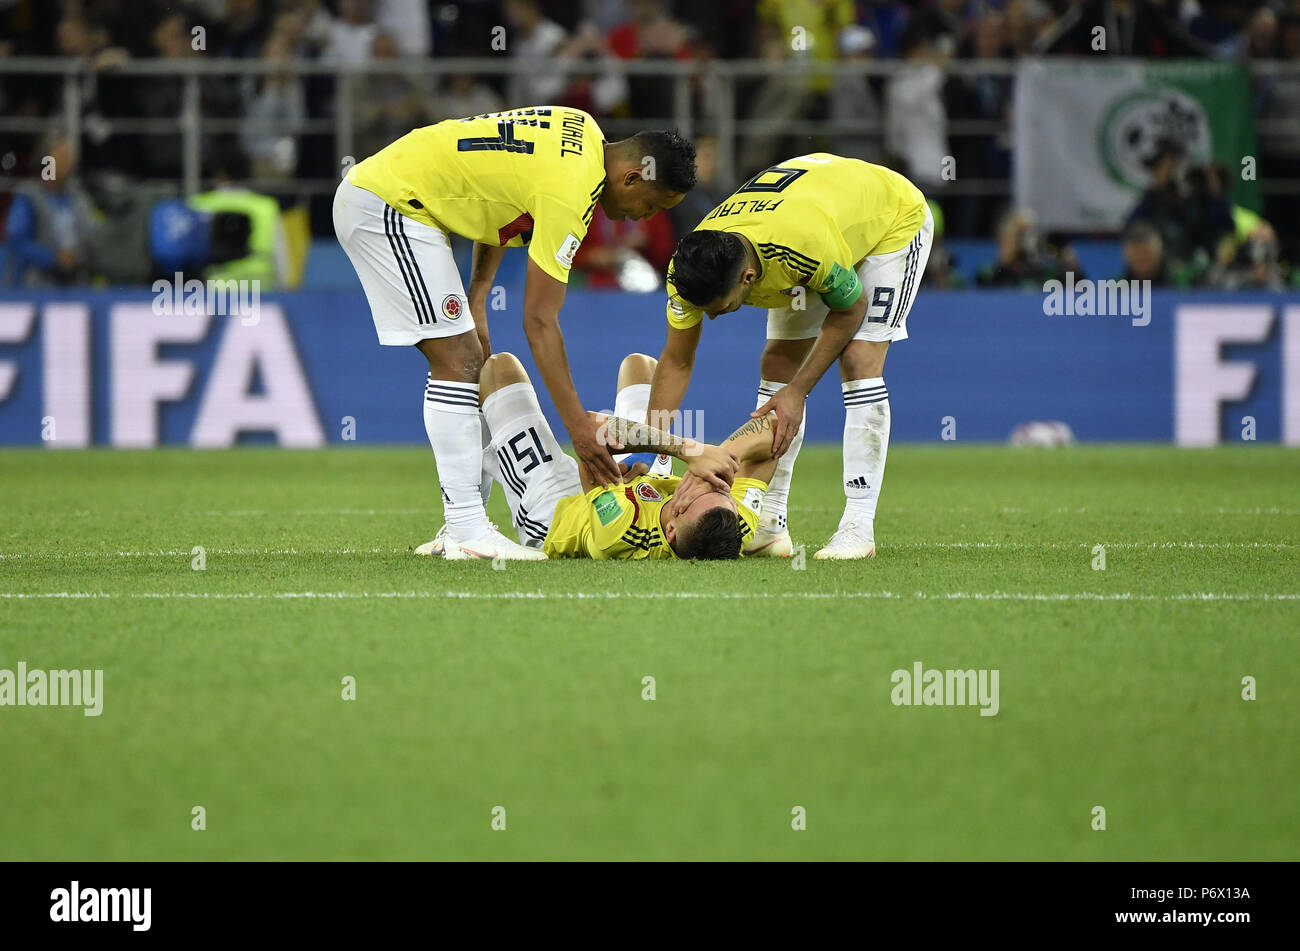 Moscow, Russia. 3rd July, 2018. Colombia's Radamel Falcao (R top) and Luis Muriel (L top) comfort Mateus Uribe after he missed a penalty kick during the penalty shootout of the 2018 FIFA World Cup round of 16 match between England and Colombia in Moscow, Russia, July 3, 2018. England won 5-4 (4-3 in penalty shootout) and advanced to the quarter-final. Credit: He Canling/Xinhua/Alamy Live News Stock Photo